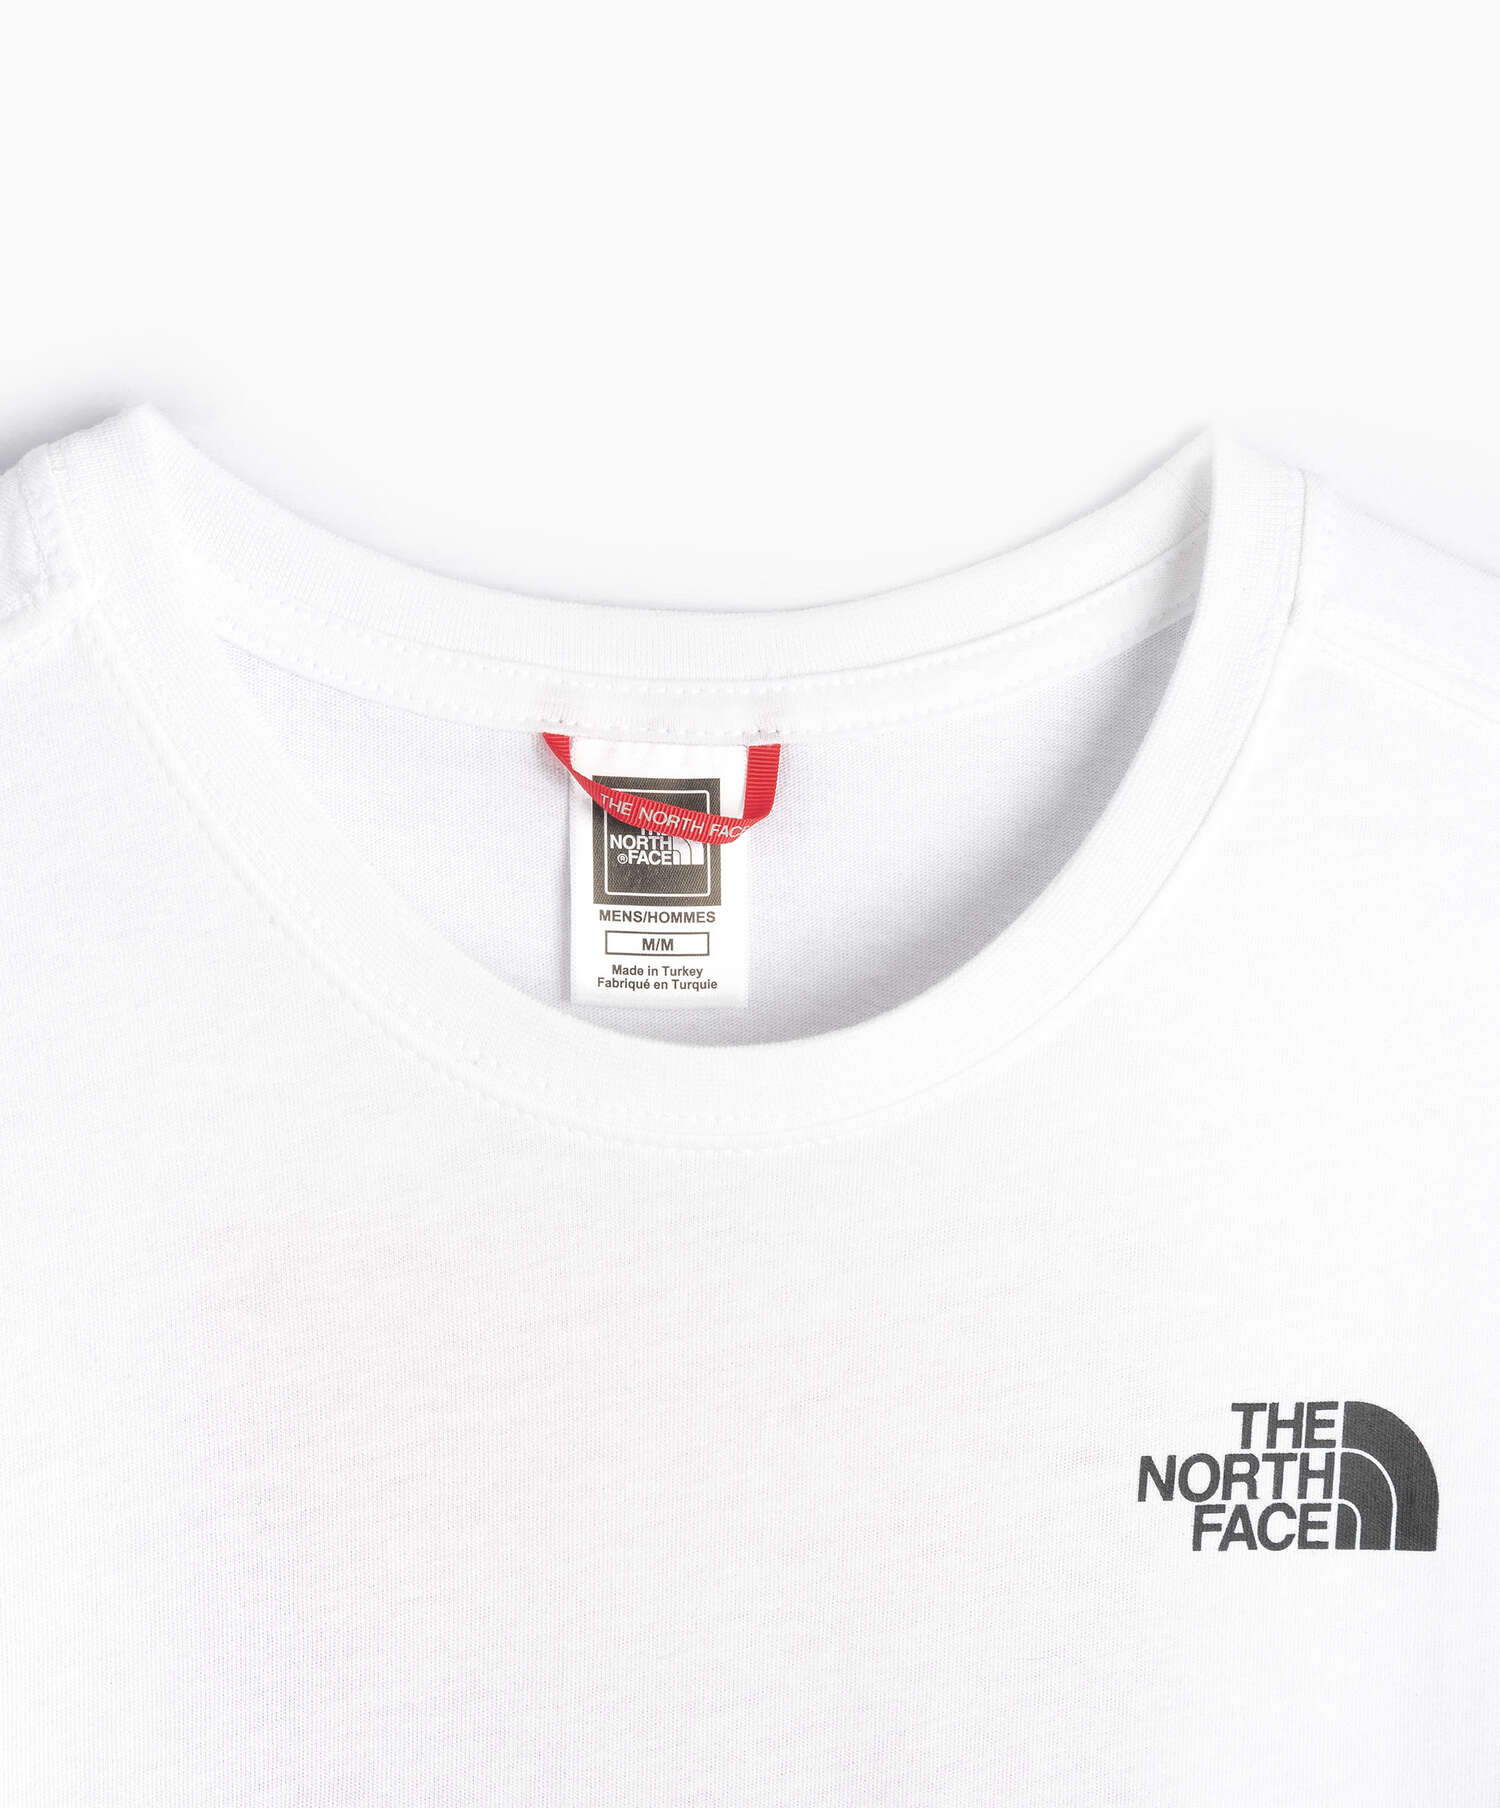 THE NORTH FACE Red Box Mens T-Shirt